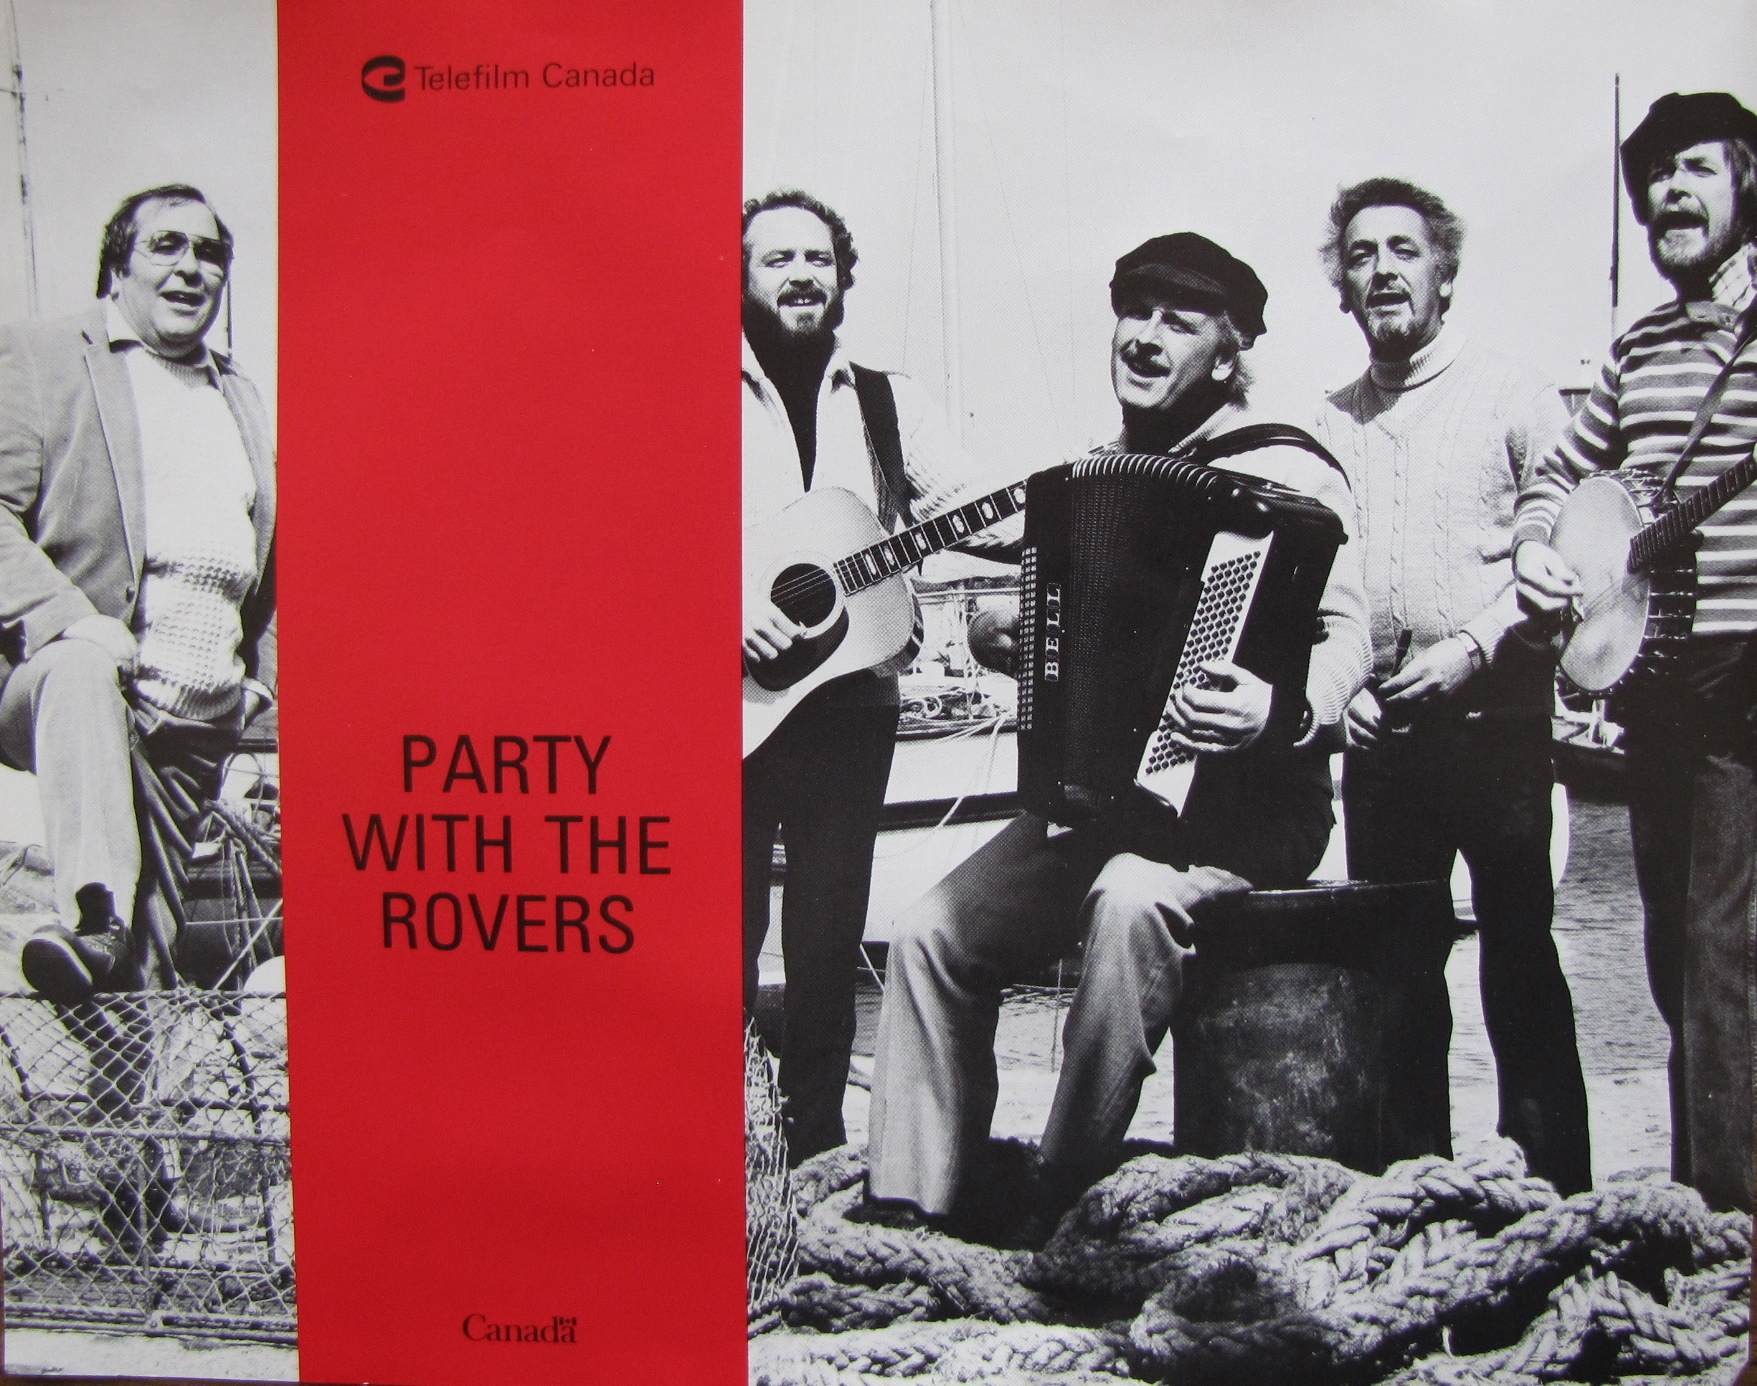 The Irish Rovers - Party with the Rovers album cover